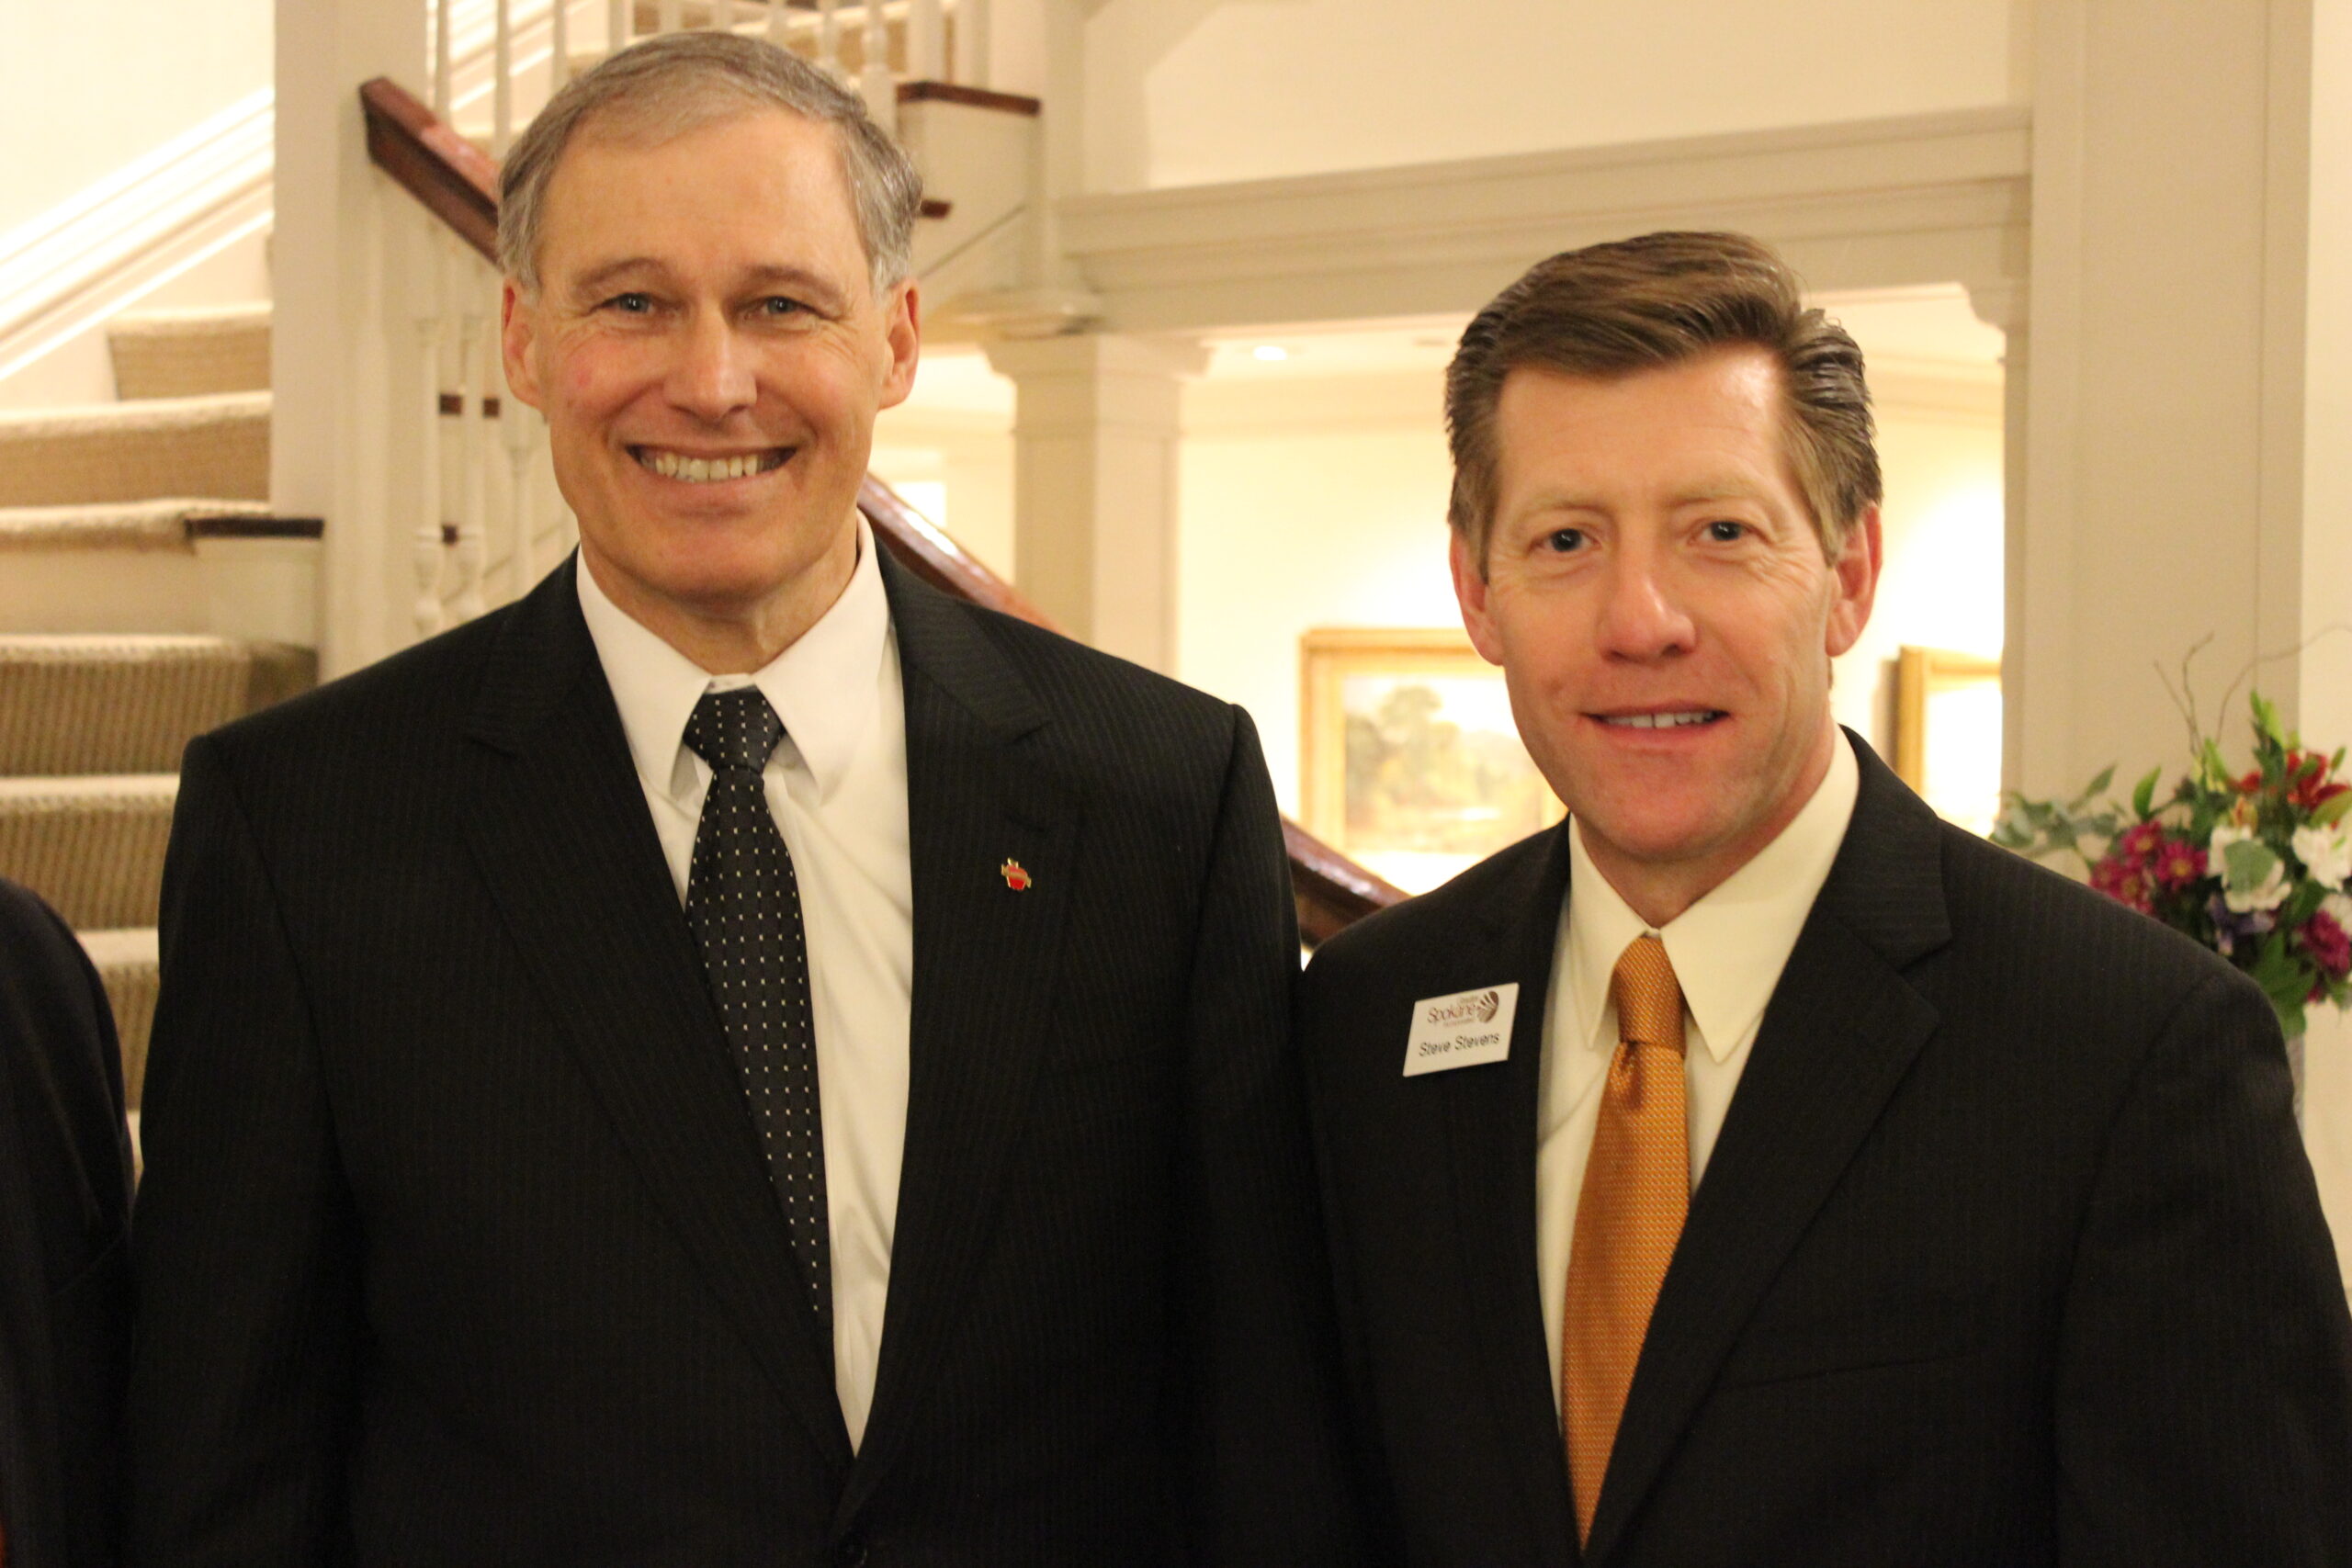 Governor Jay Inslee with GSI CEO and President Steve Stevens at the Governor's Mansion Grand Reception.